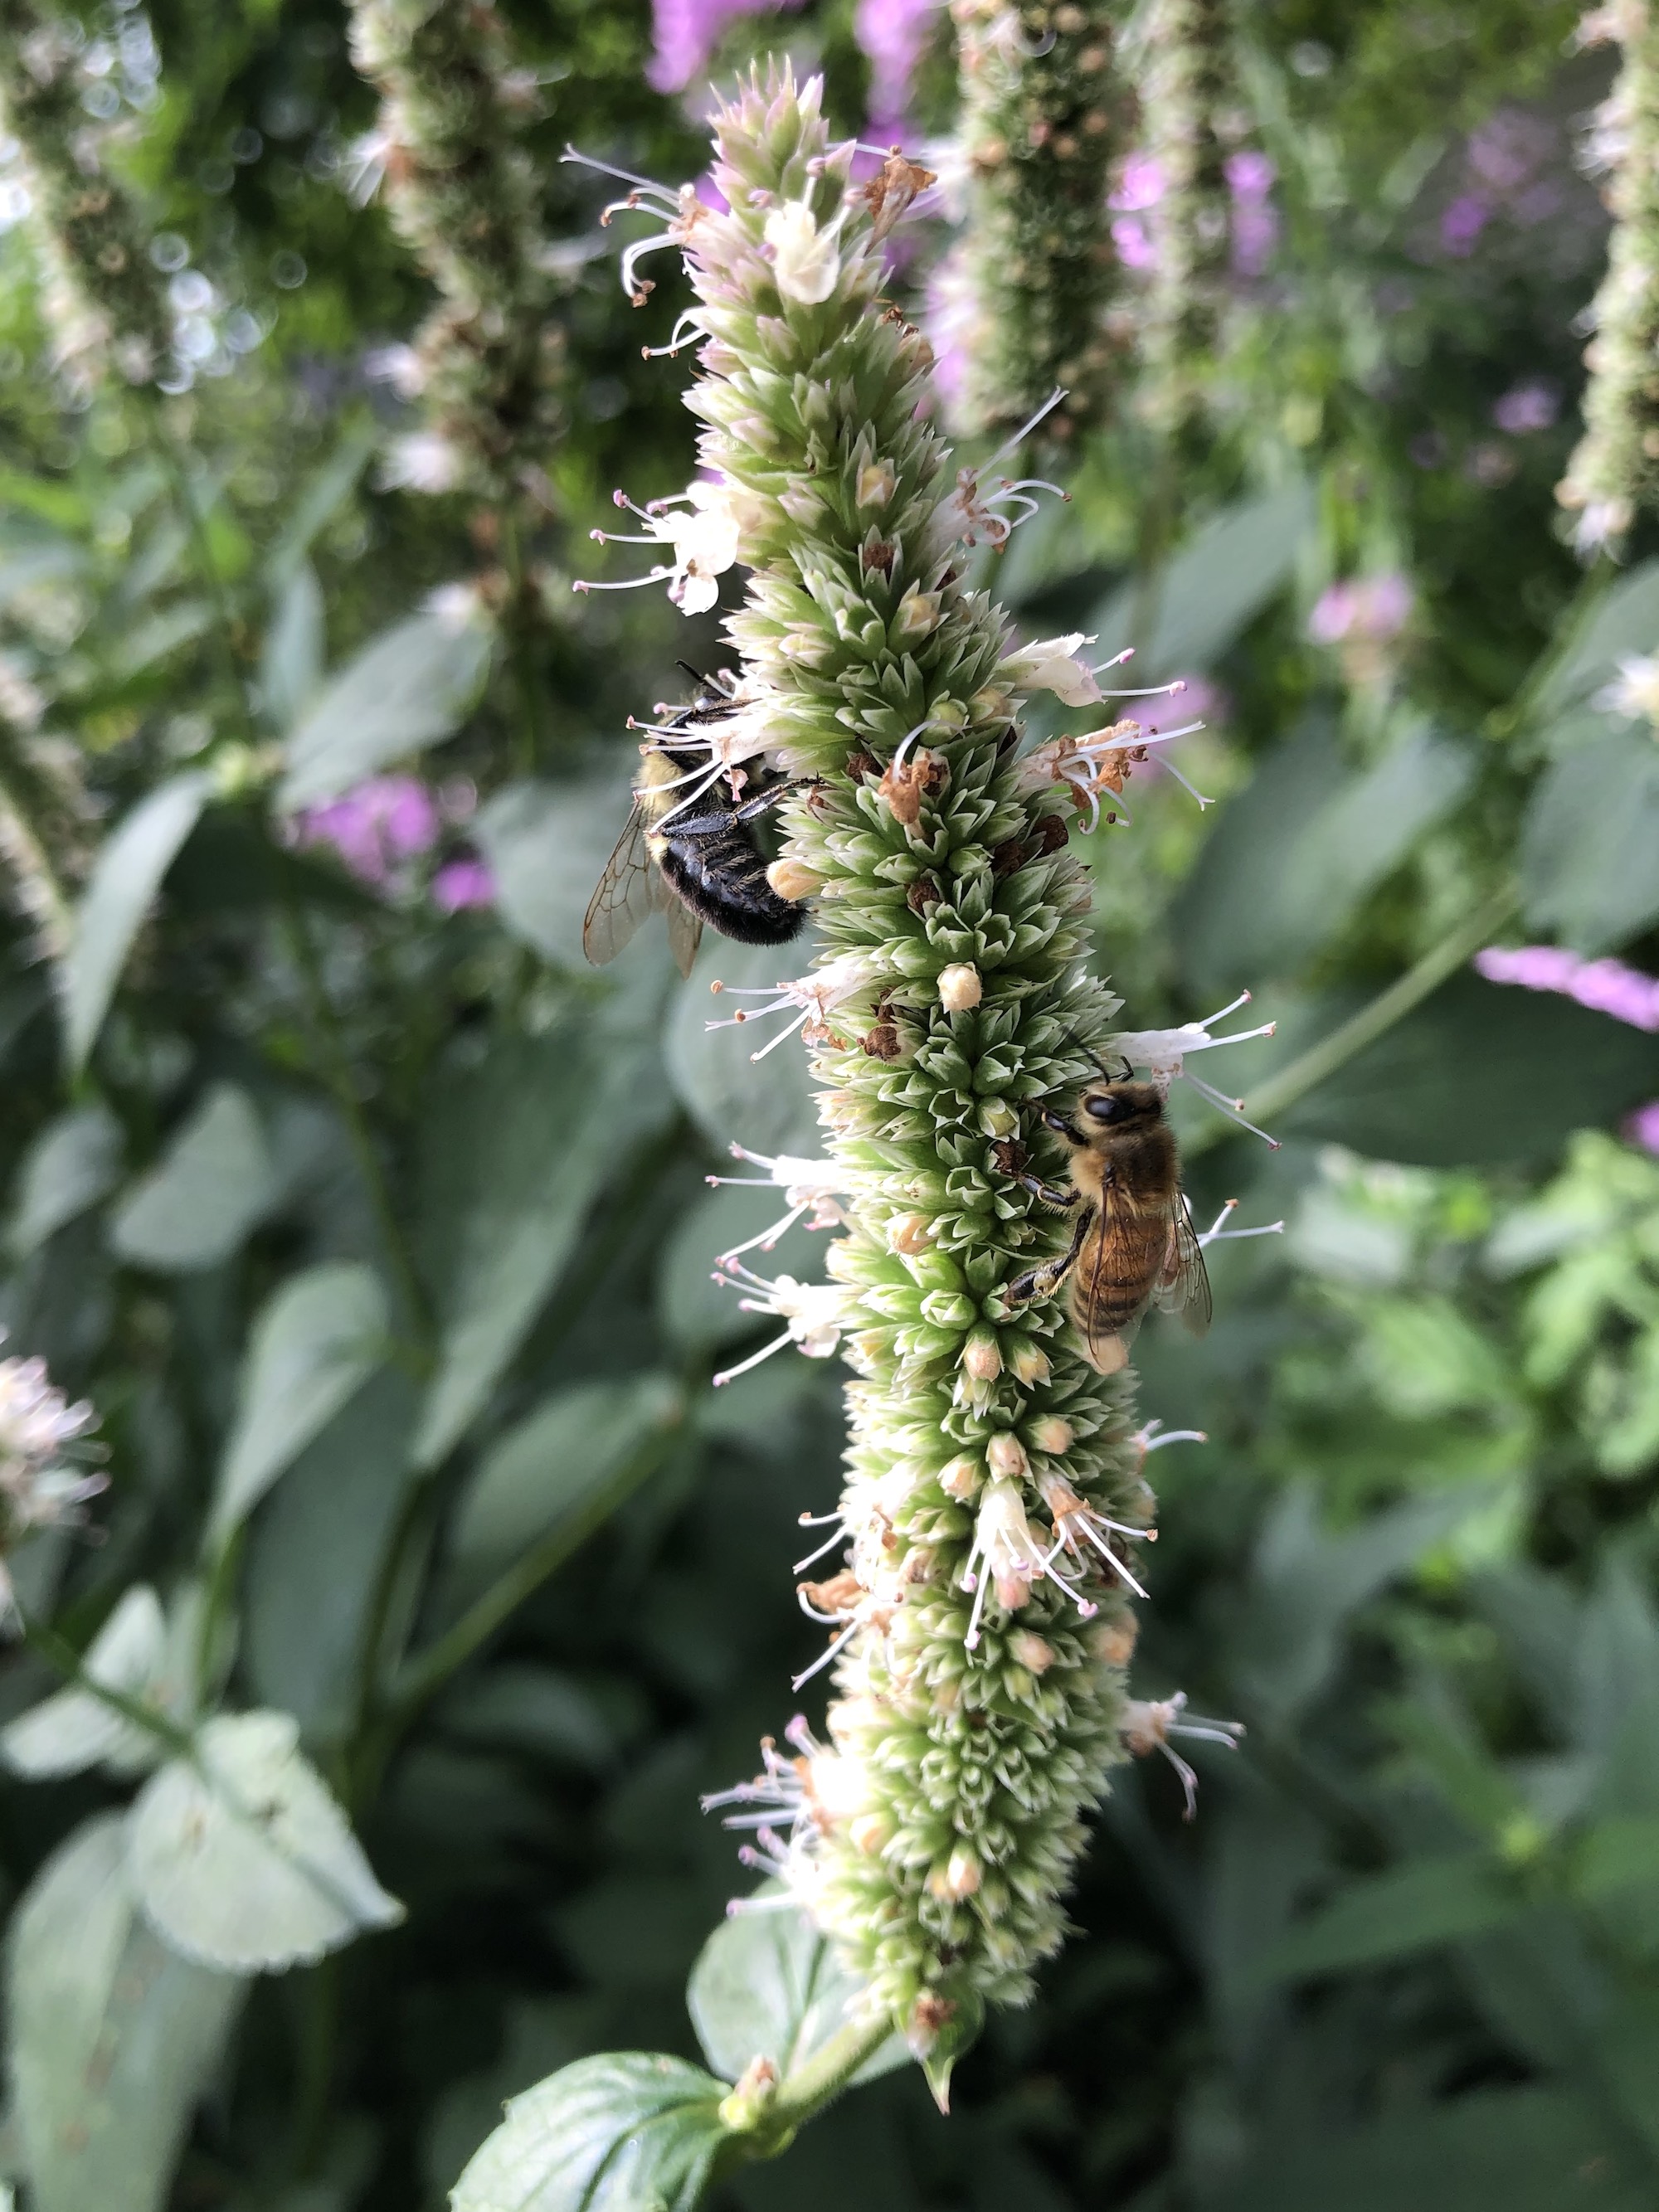 Hyssop near Agawa Path in Nakoma in Madison, Wisconsin on August 22, 2020.